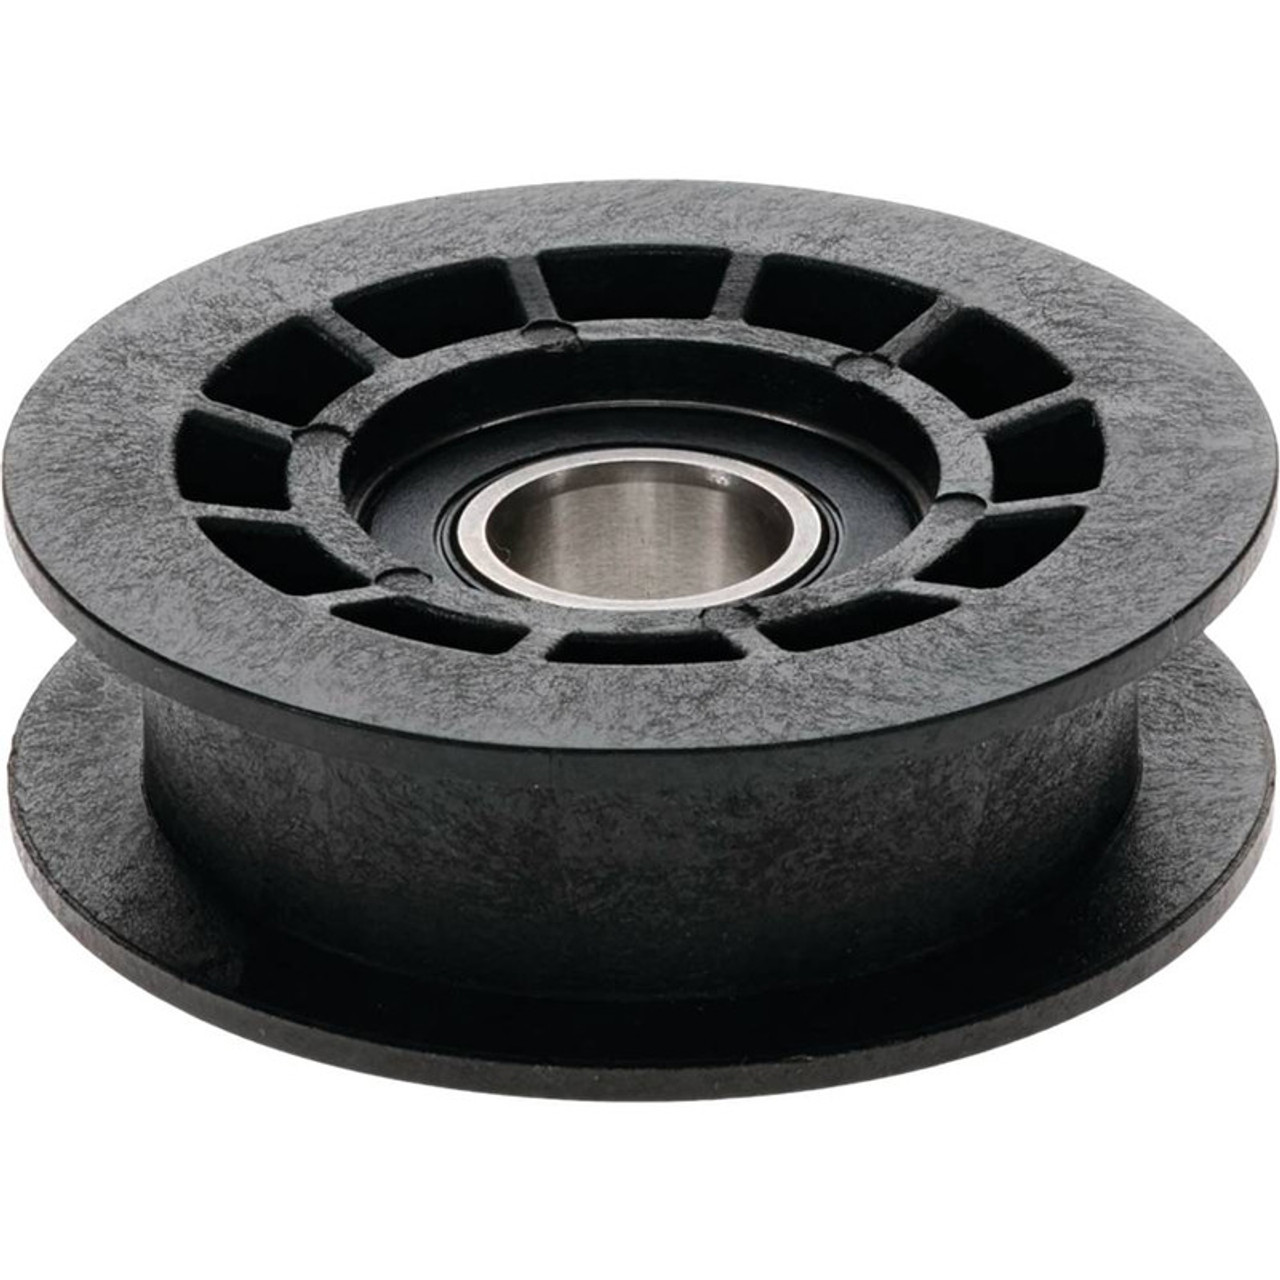 Idler Pulley for Husqvarna LC221A, LC221AH, LC221R, LC221RH, LC356VB, 587969201, ID: 1/2", OD: 2-1/4", Height: 11/16"